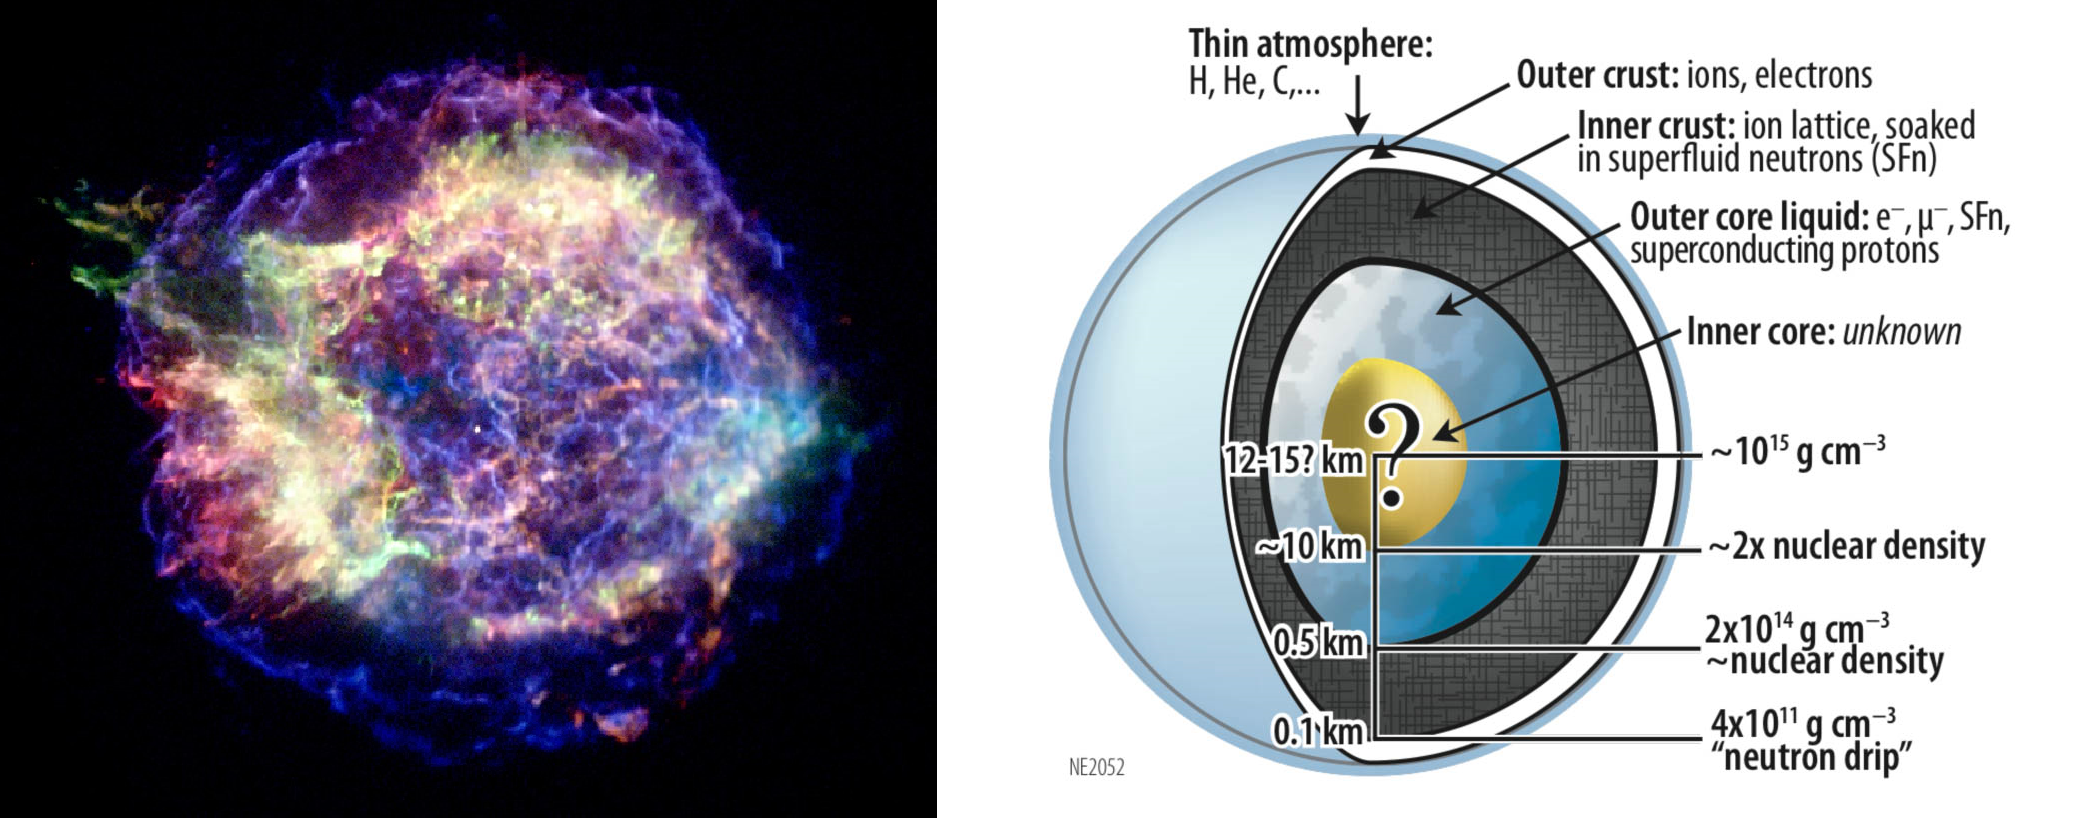 Left: X-ray observations of Cassiopeia A from the NASA Chandra satellite (the central white spot is a neutron star). Right: internal constitution of a neutron star, taken from http://heasarc.gsfc.nasa.gov/docs/nicer/nicer_about.html